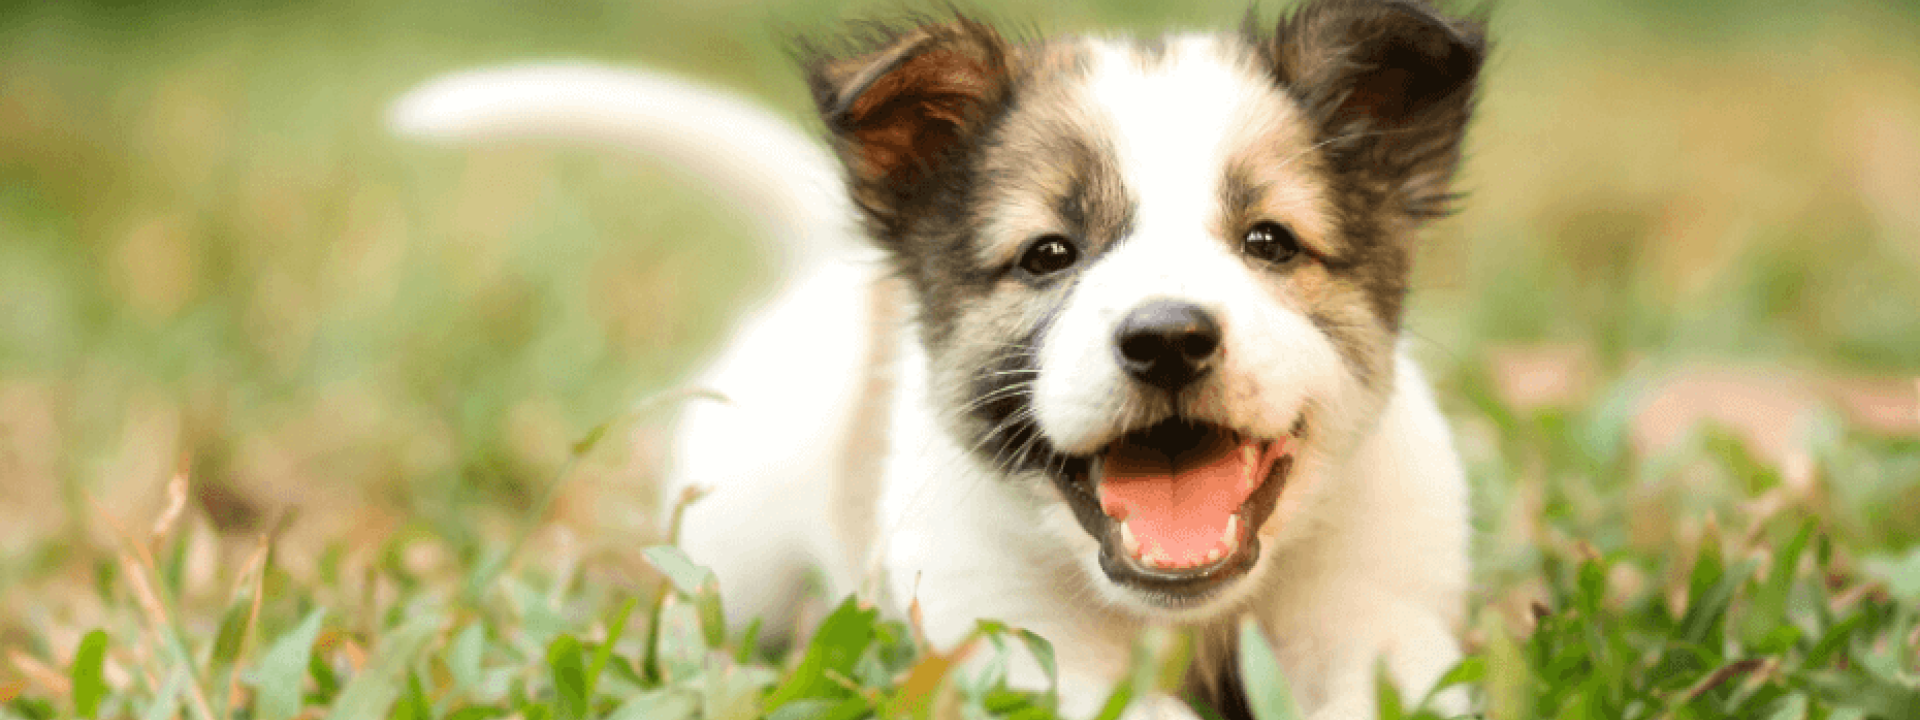 Smiling puppy outside in grass